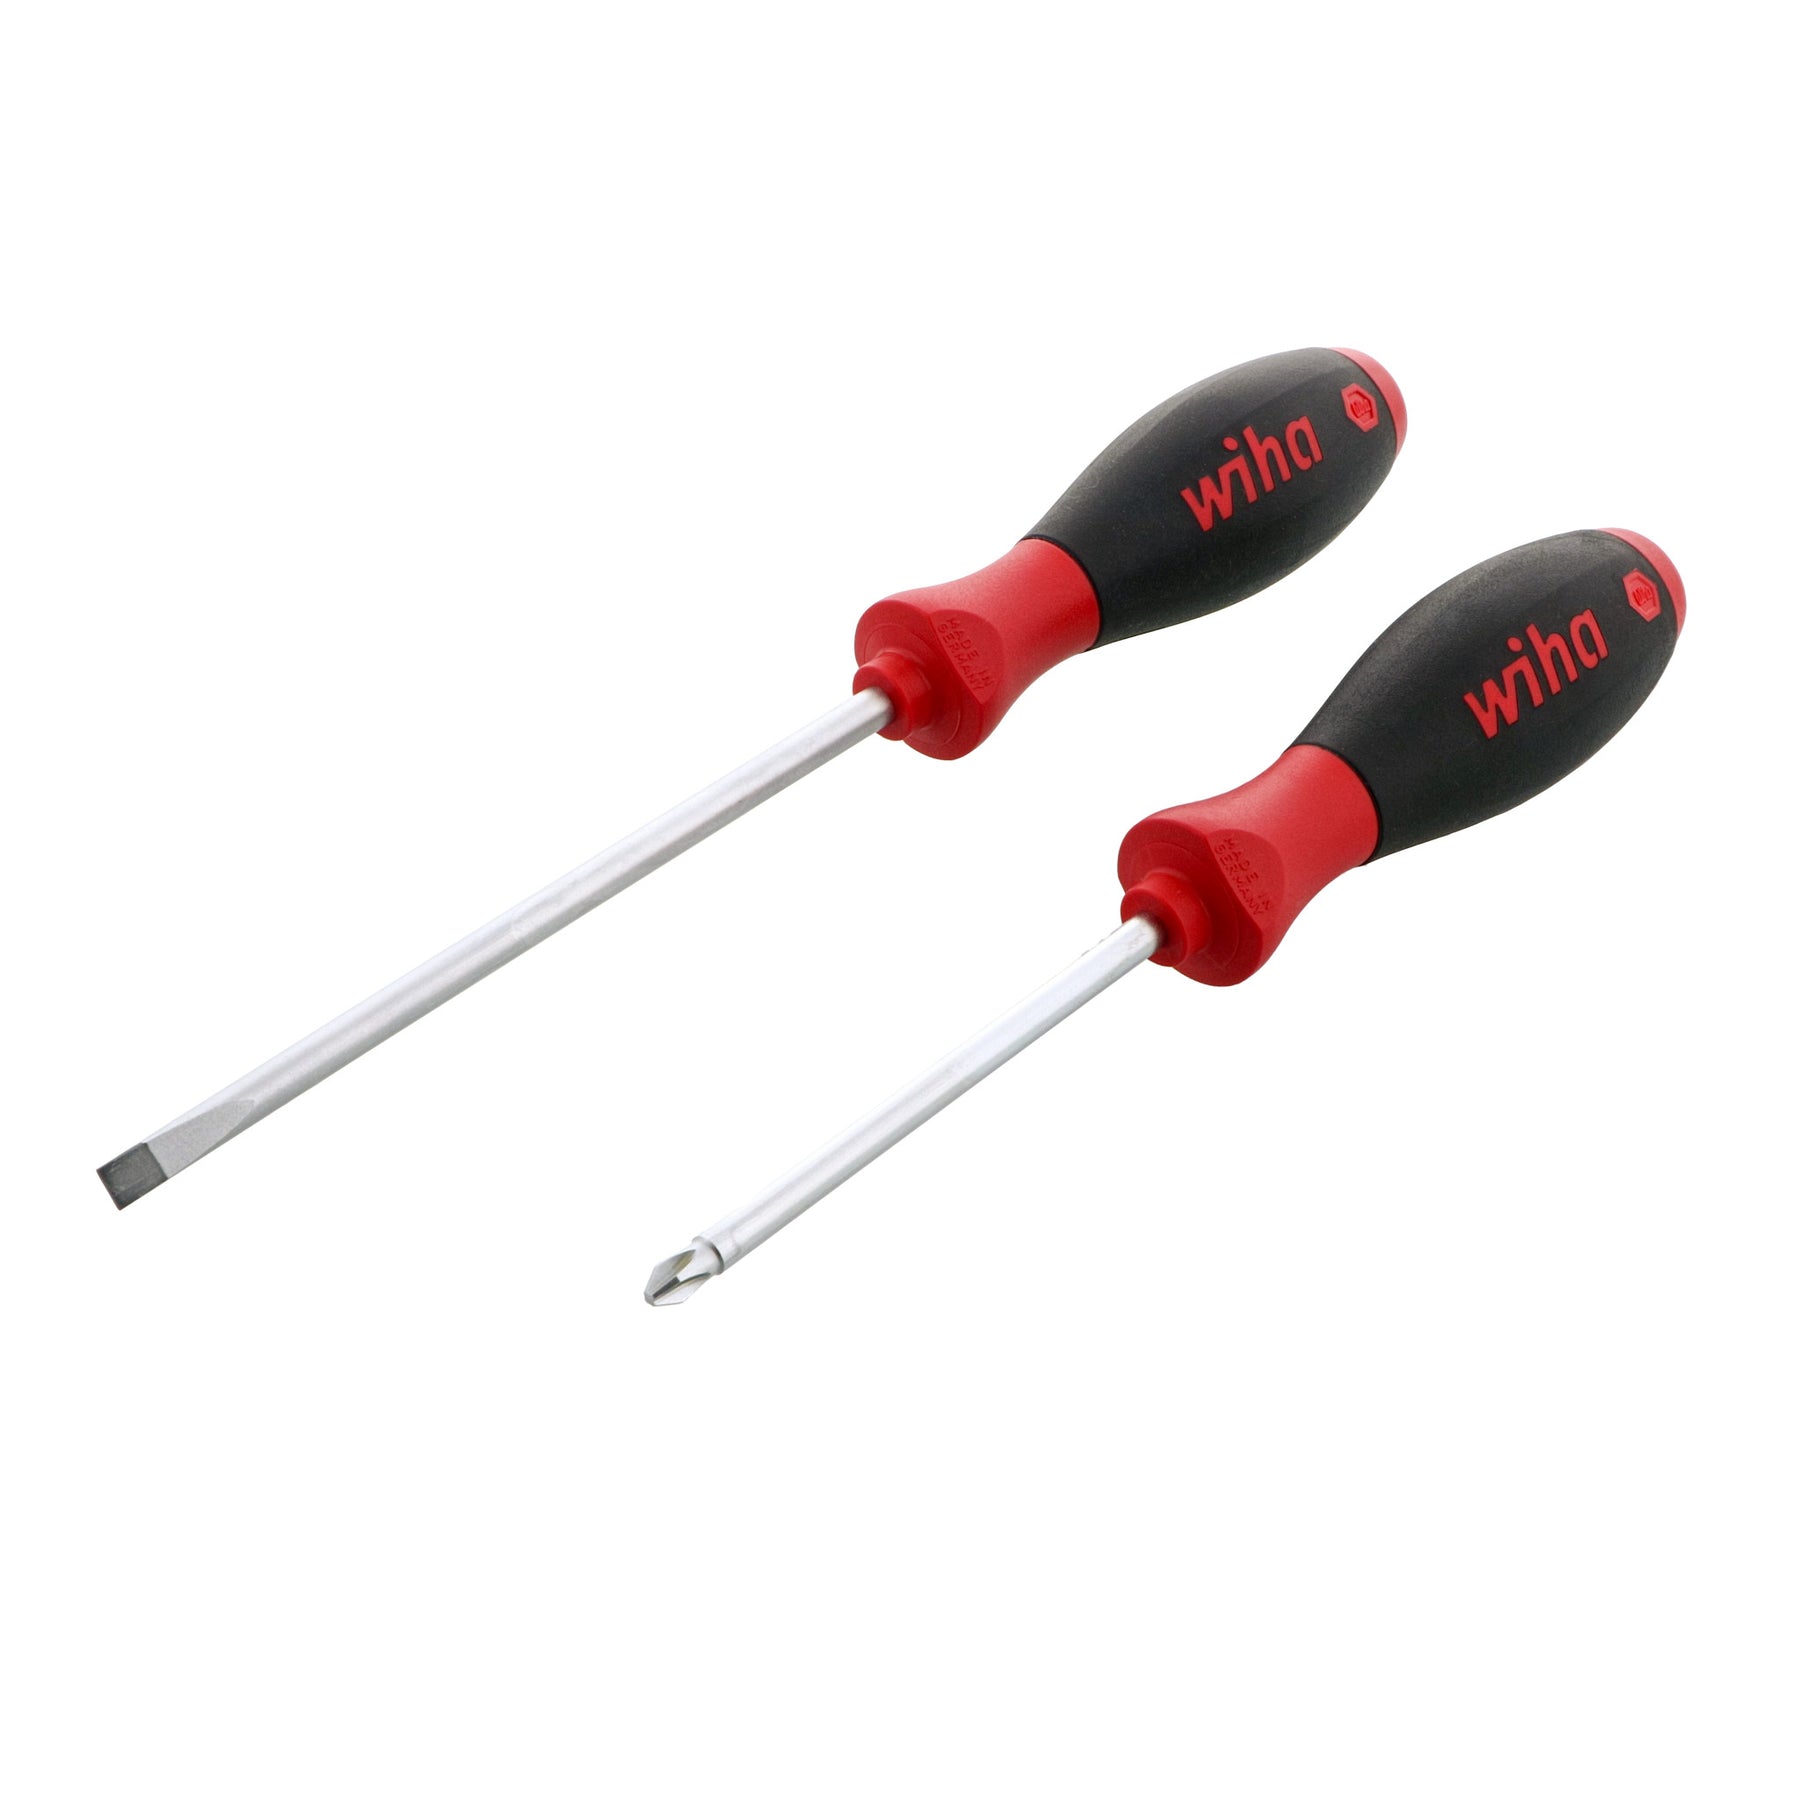 Wiha 30279 2 Piece SoftFinish Slotted and Phillips Screwdriver Set